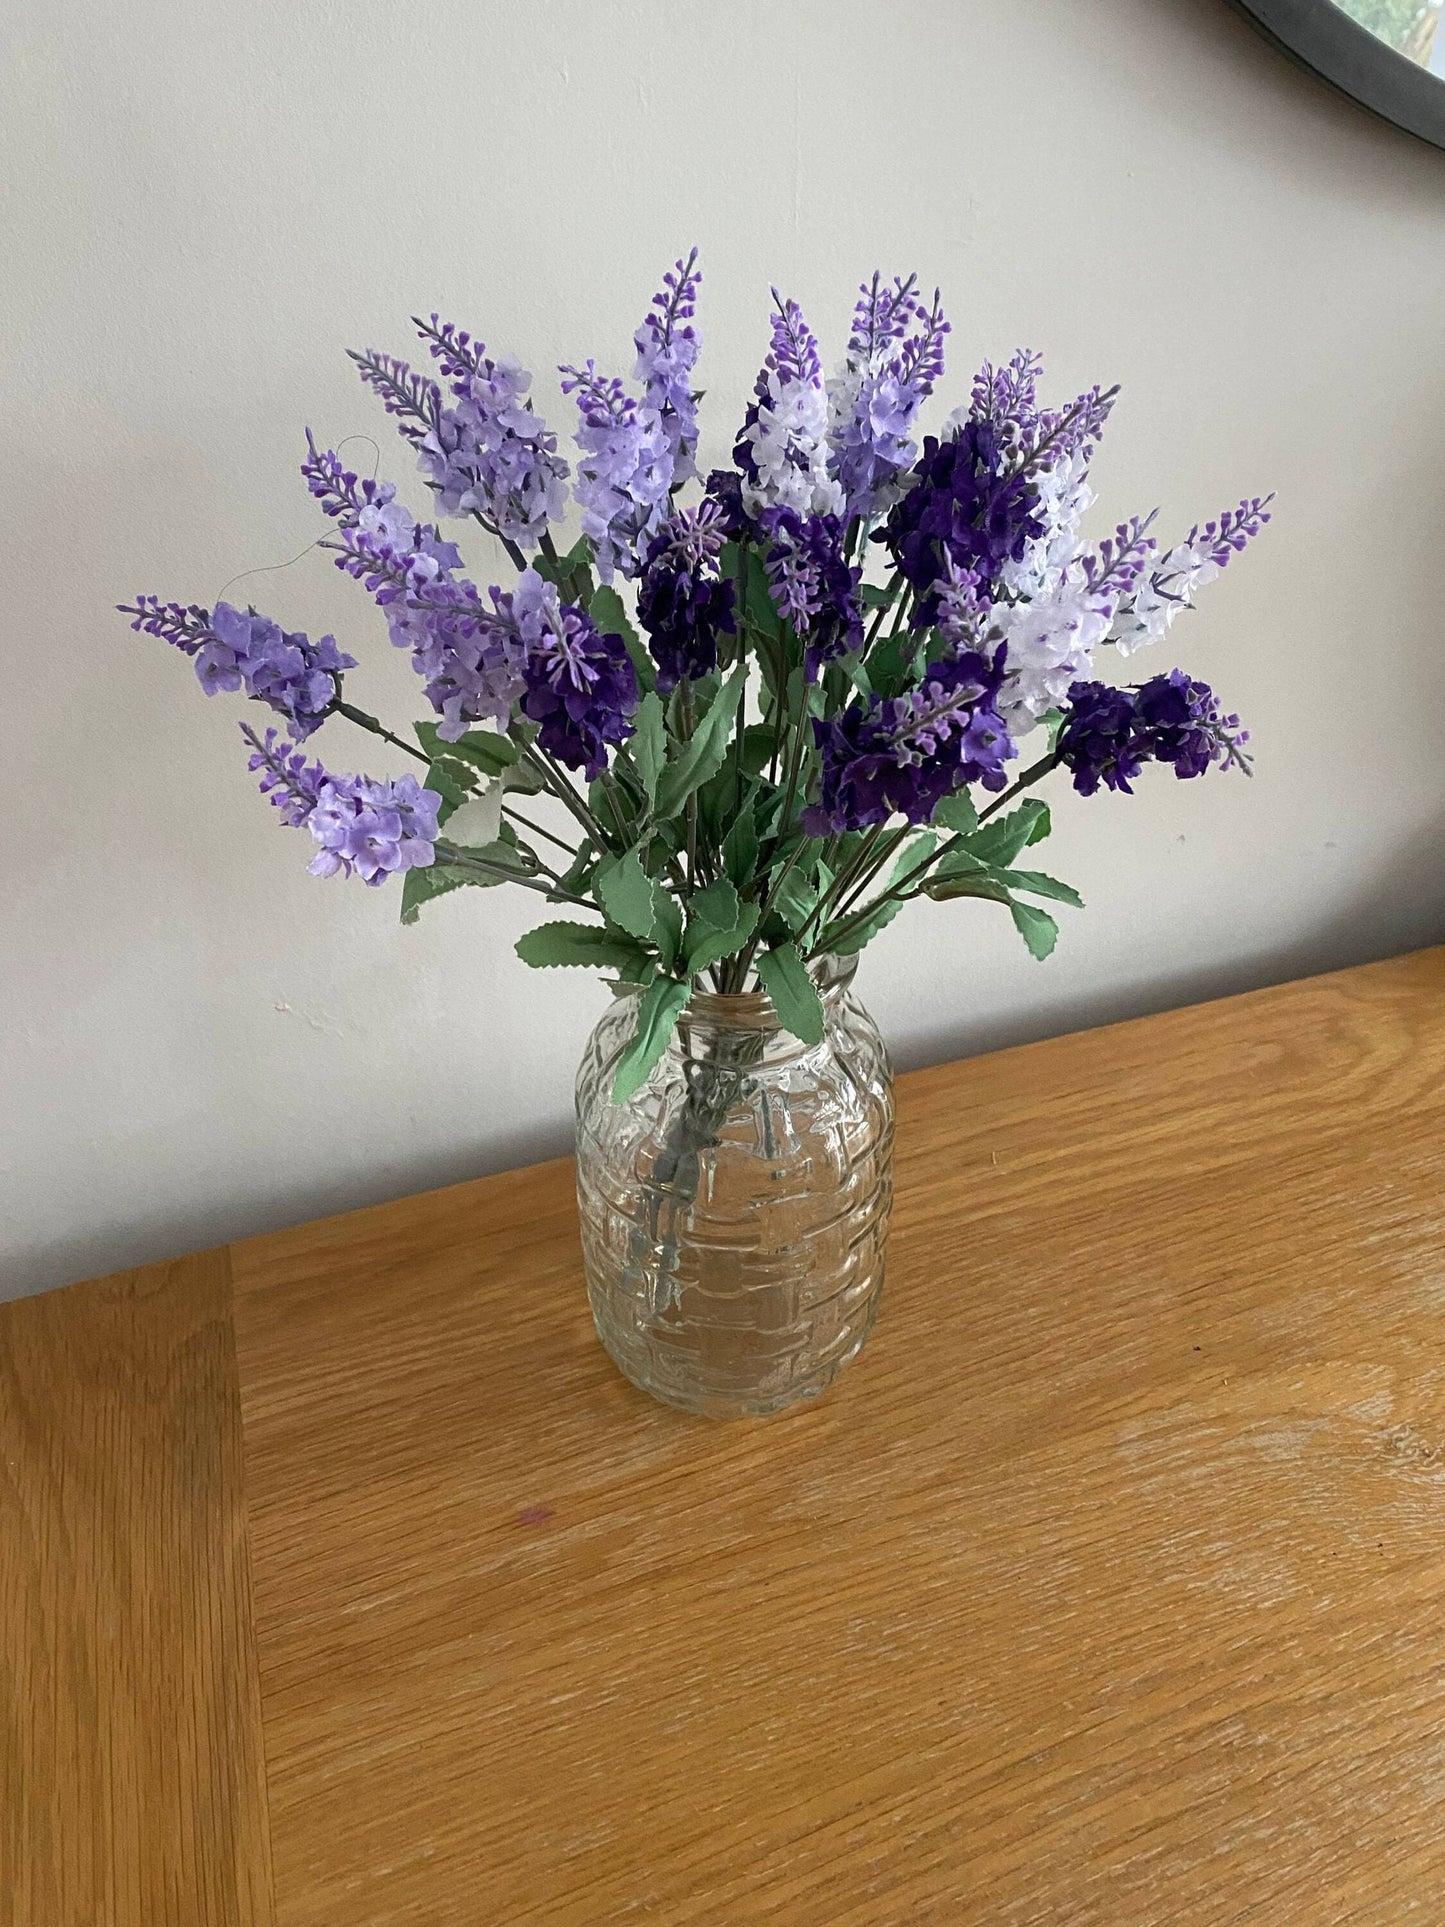 3 Lavender Bunches 15 Stems